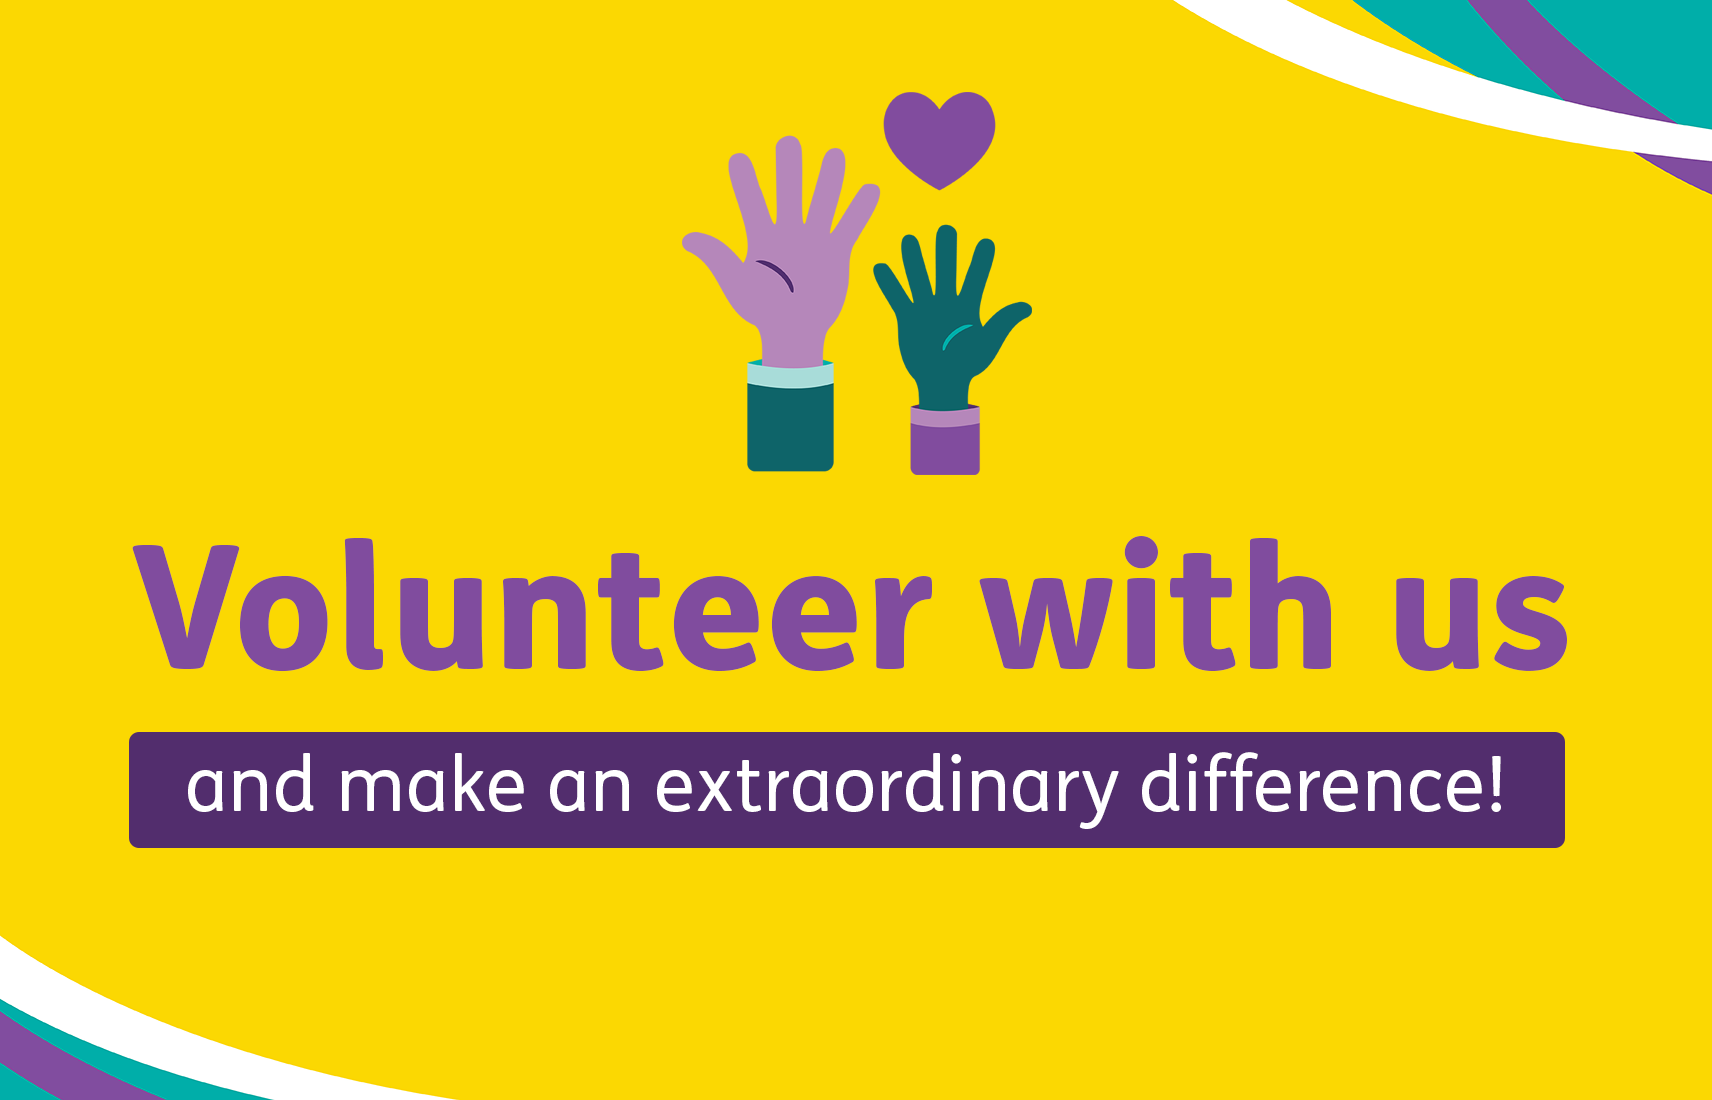 Volunteer with us and make an extraordinary difference!